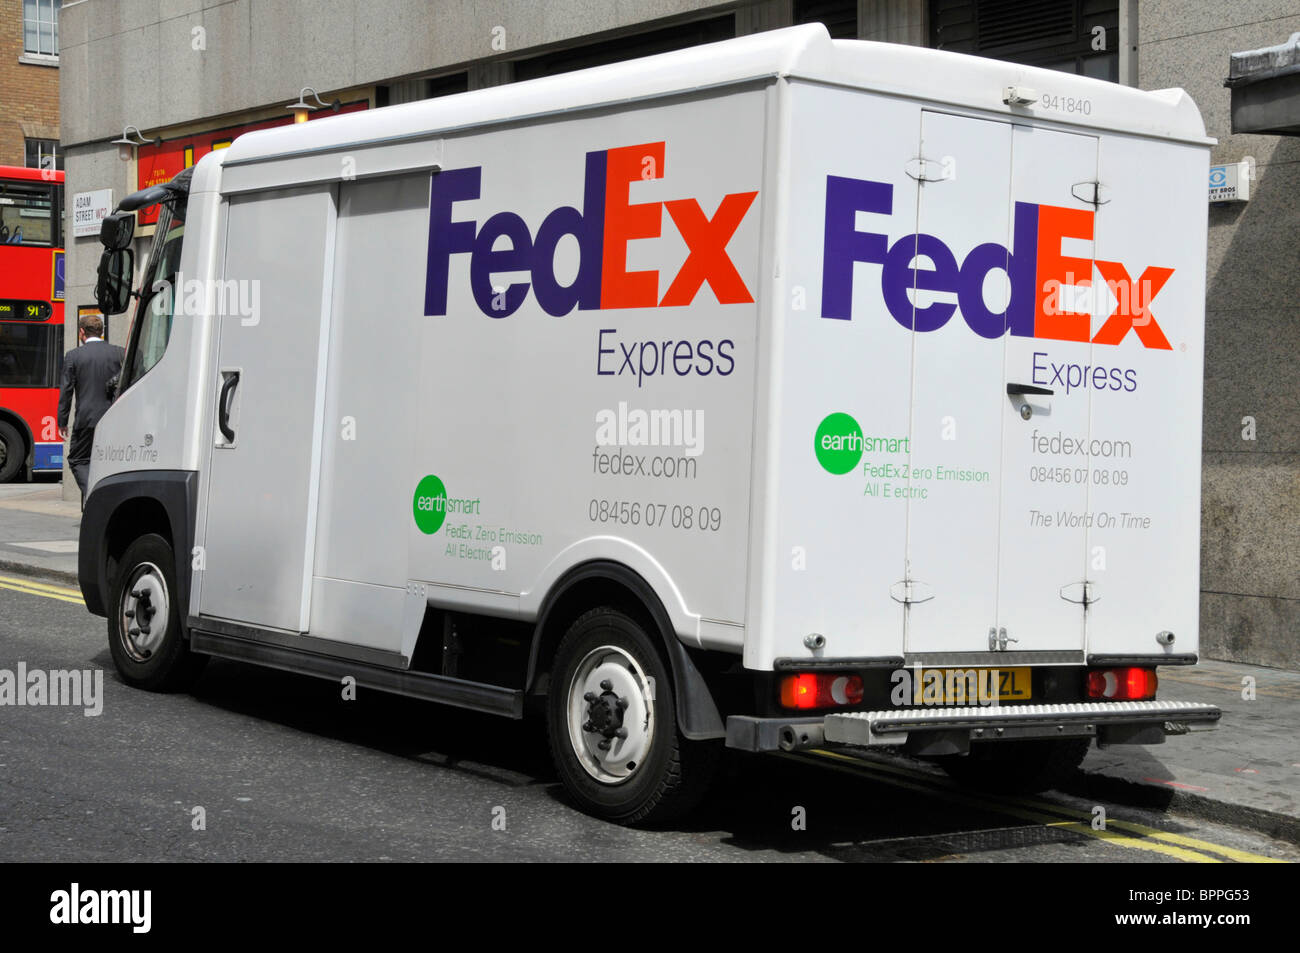 Side back rear view FedEx Express brand all electric zero emission  parcel delivery business van lorry truck parked in street in London England UK Stock Photo